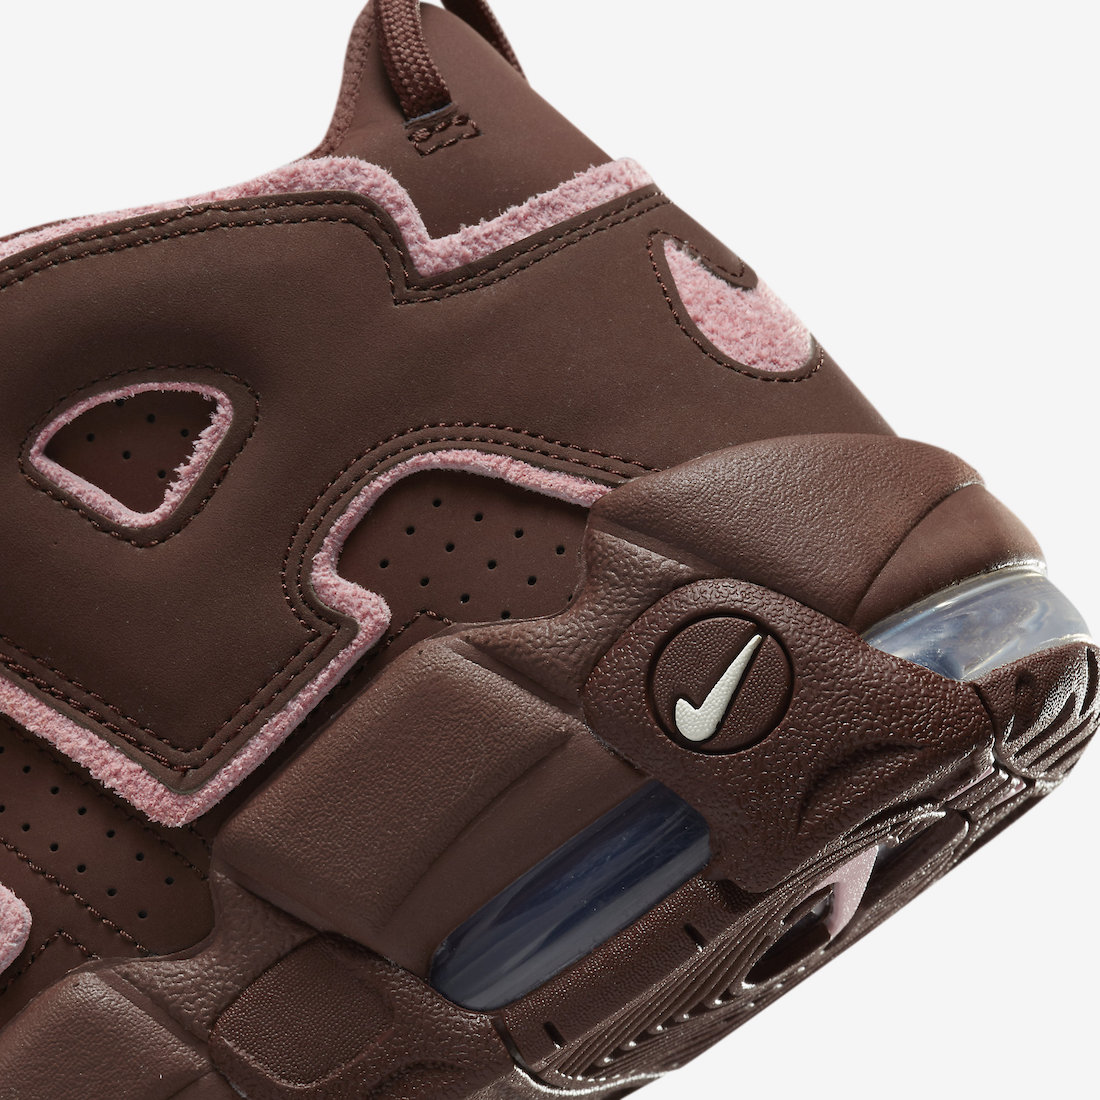 Nike Air More Uptempo Valentines Day DV3466-200 Release Date